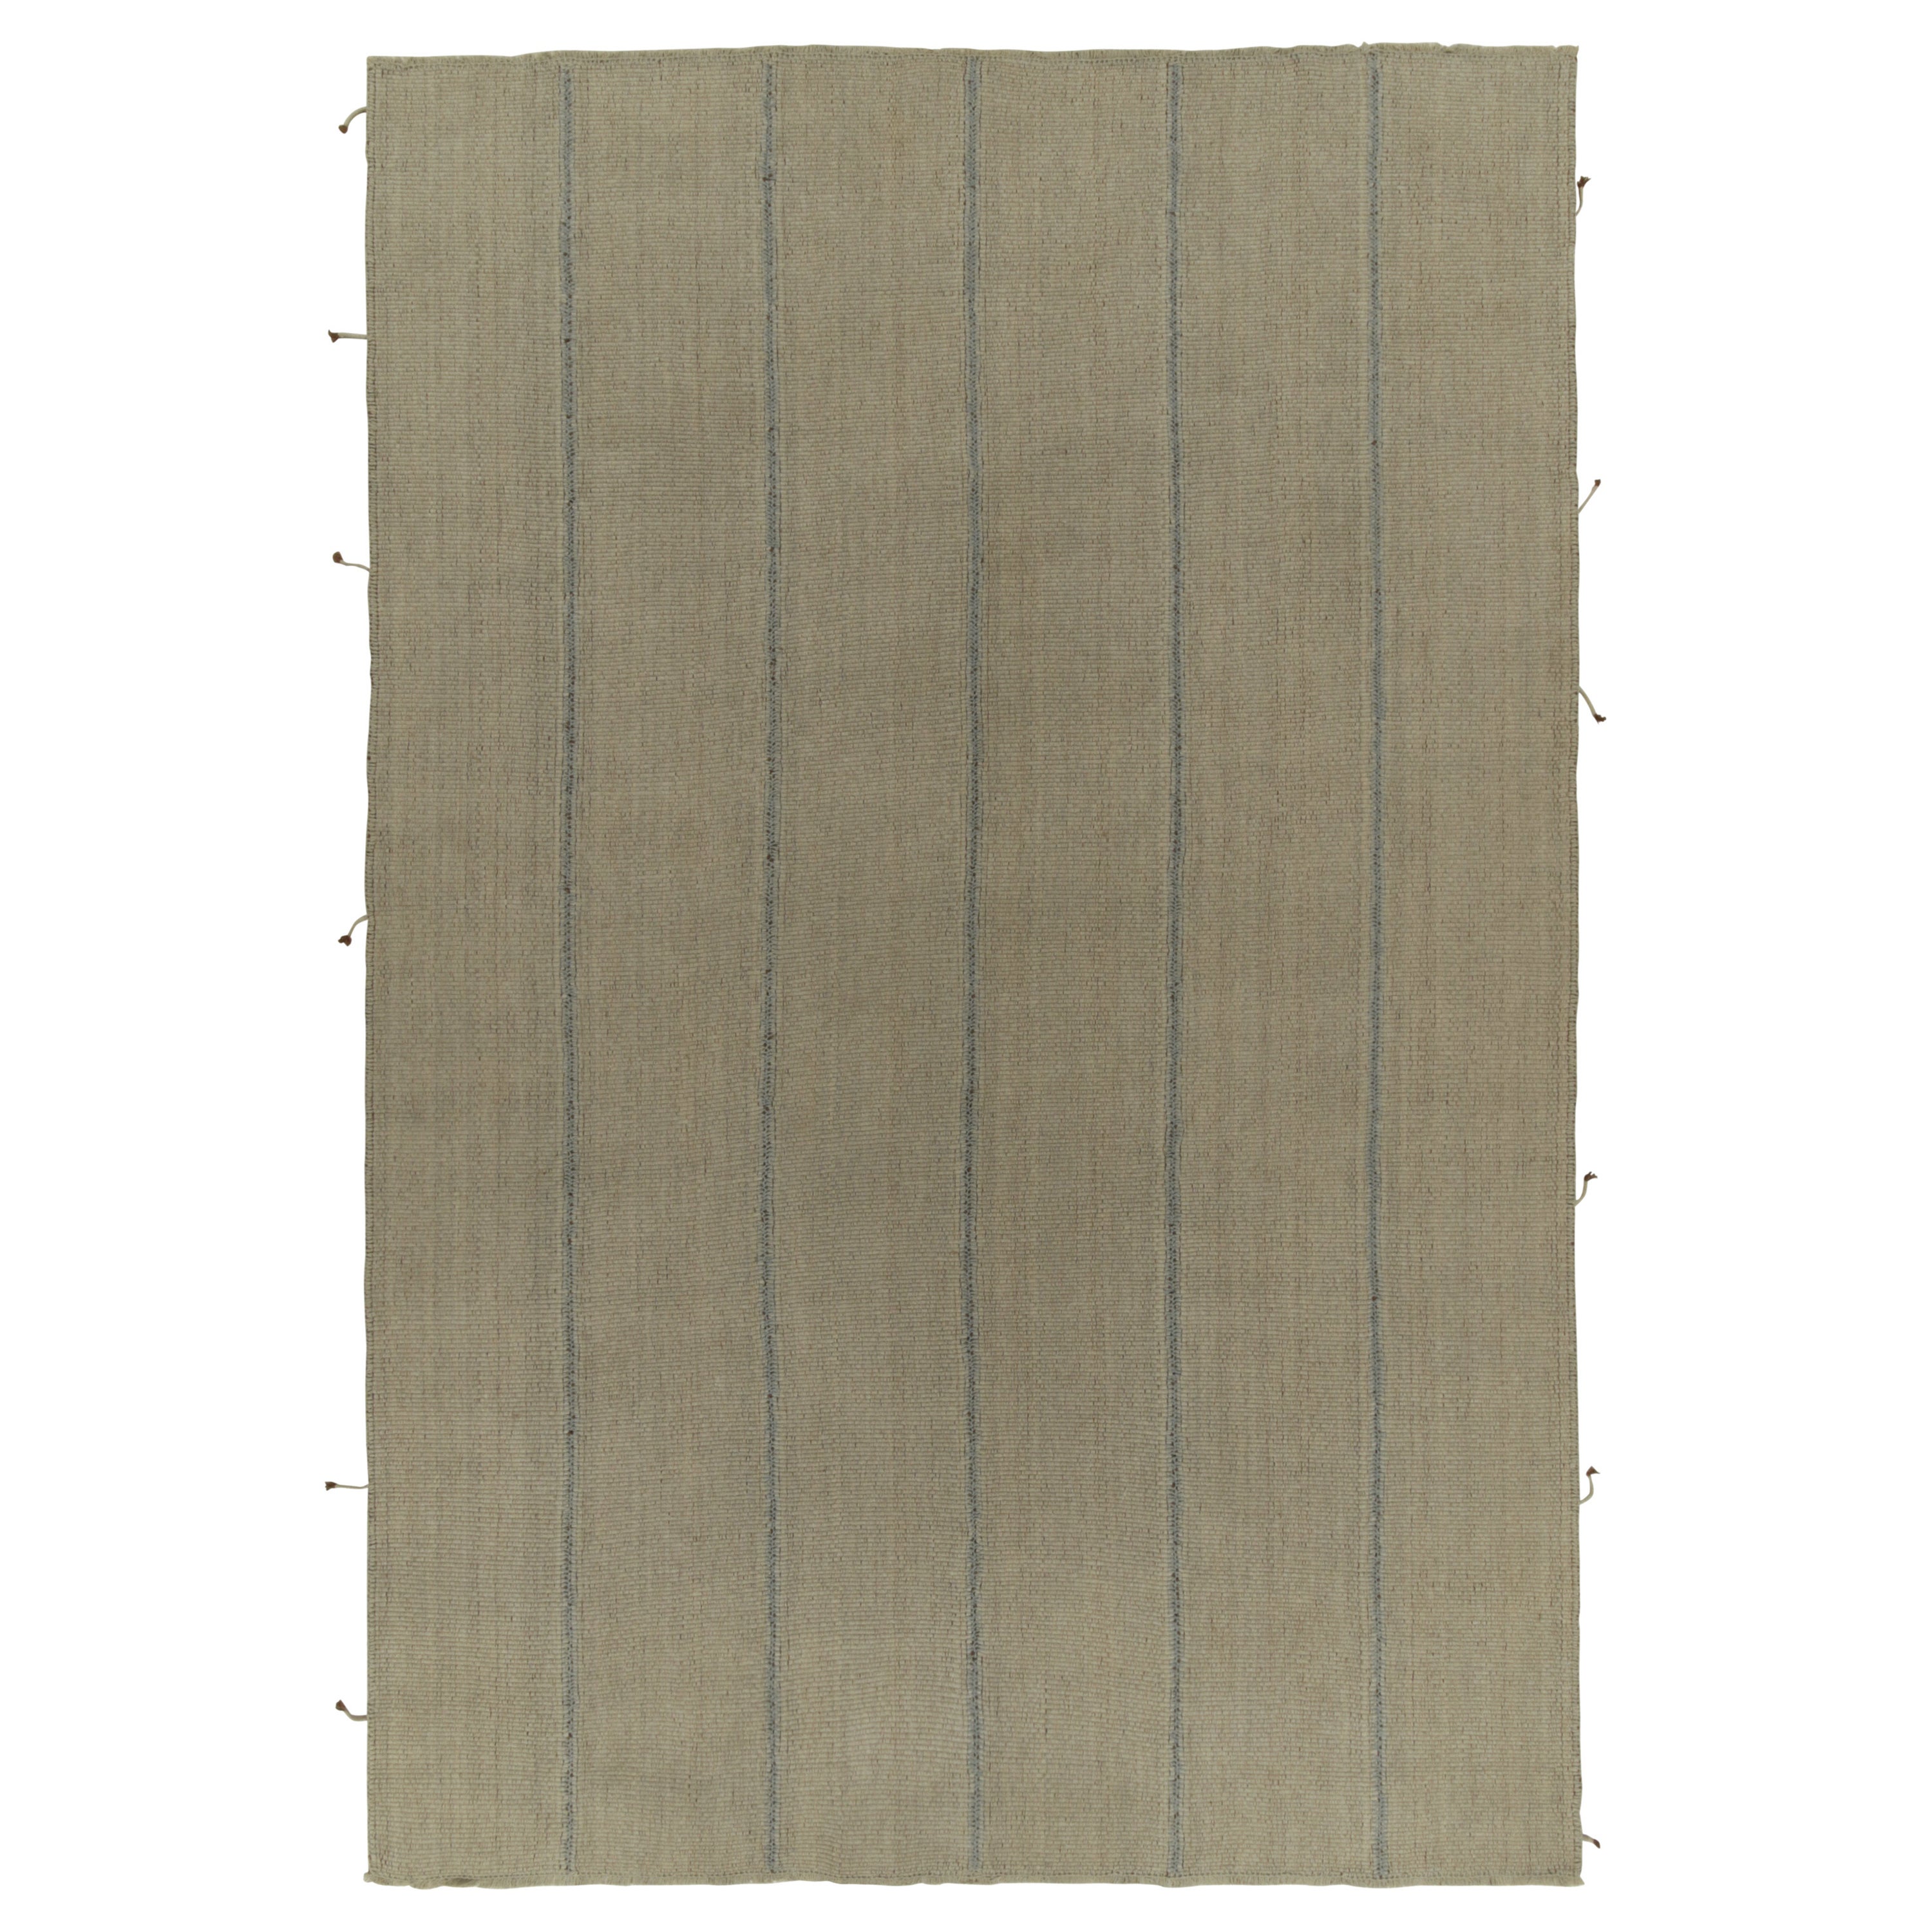 Rug & Kilim’s Contemporary Kilim in Beige Panels with Blue Stripes